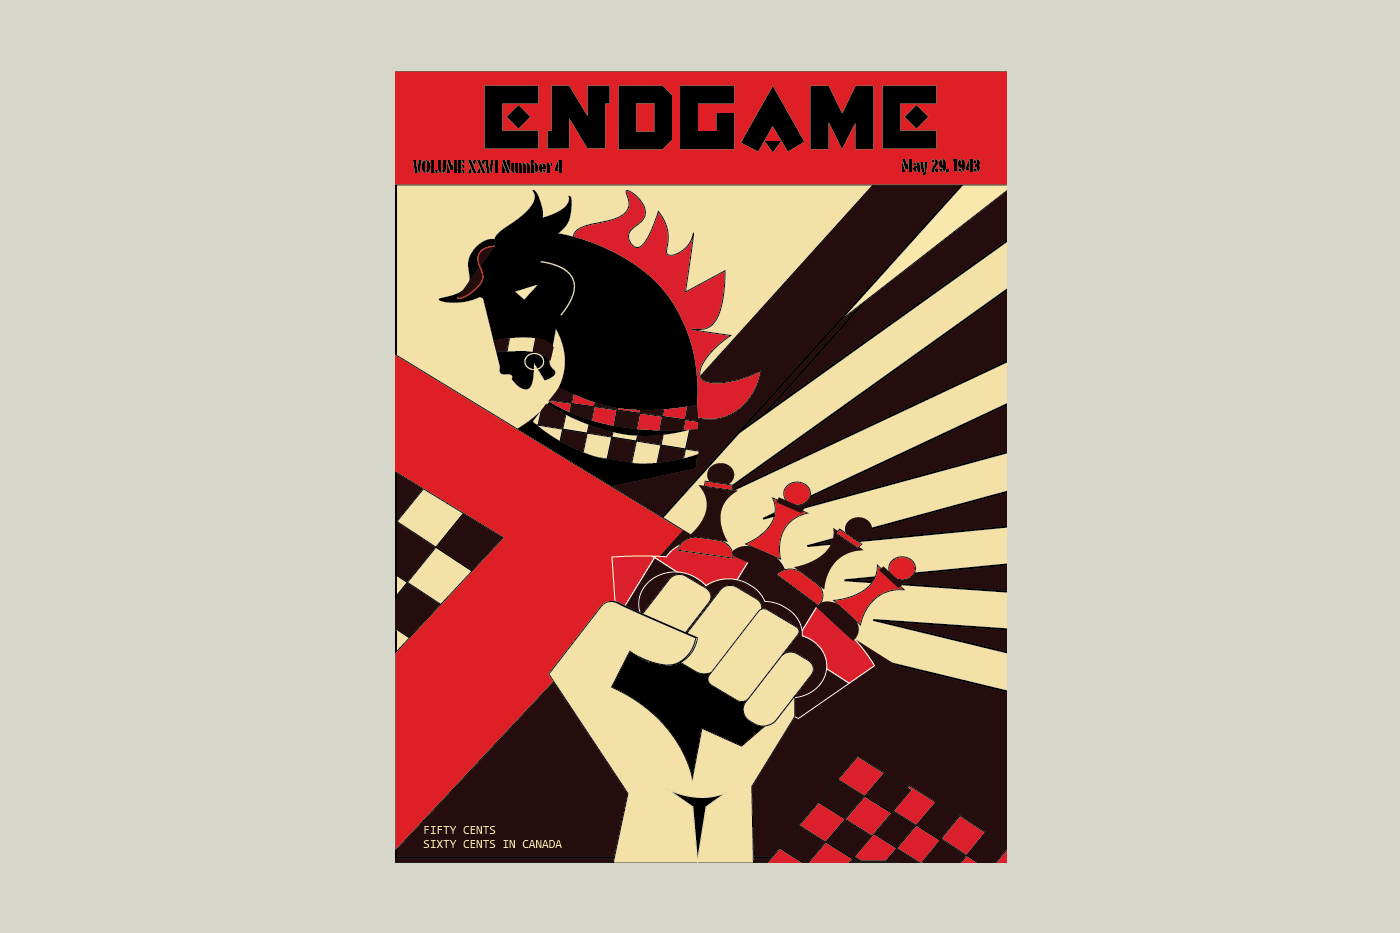 Chess magazine cover inspired by constructivism, a 20th century design style. 

